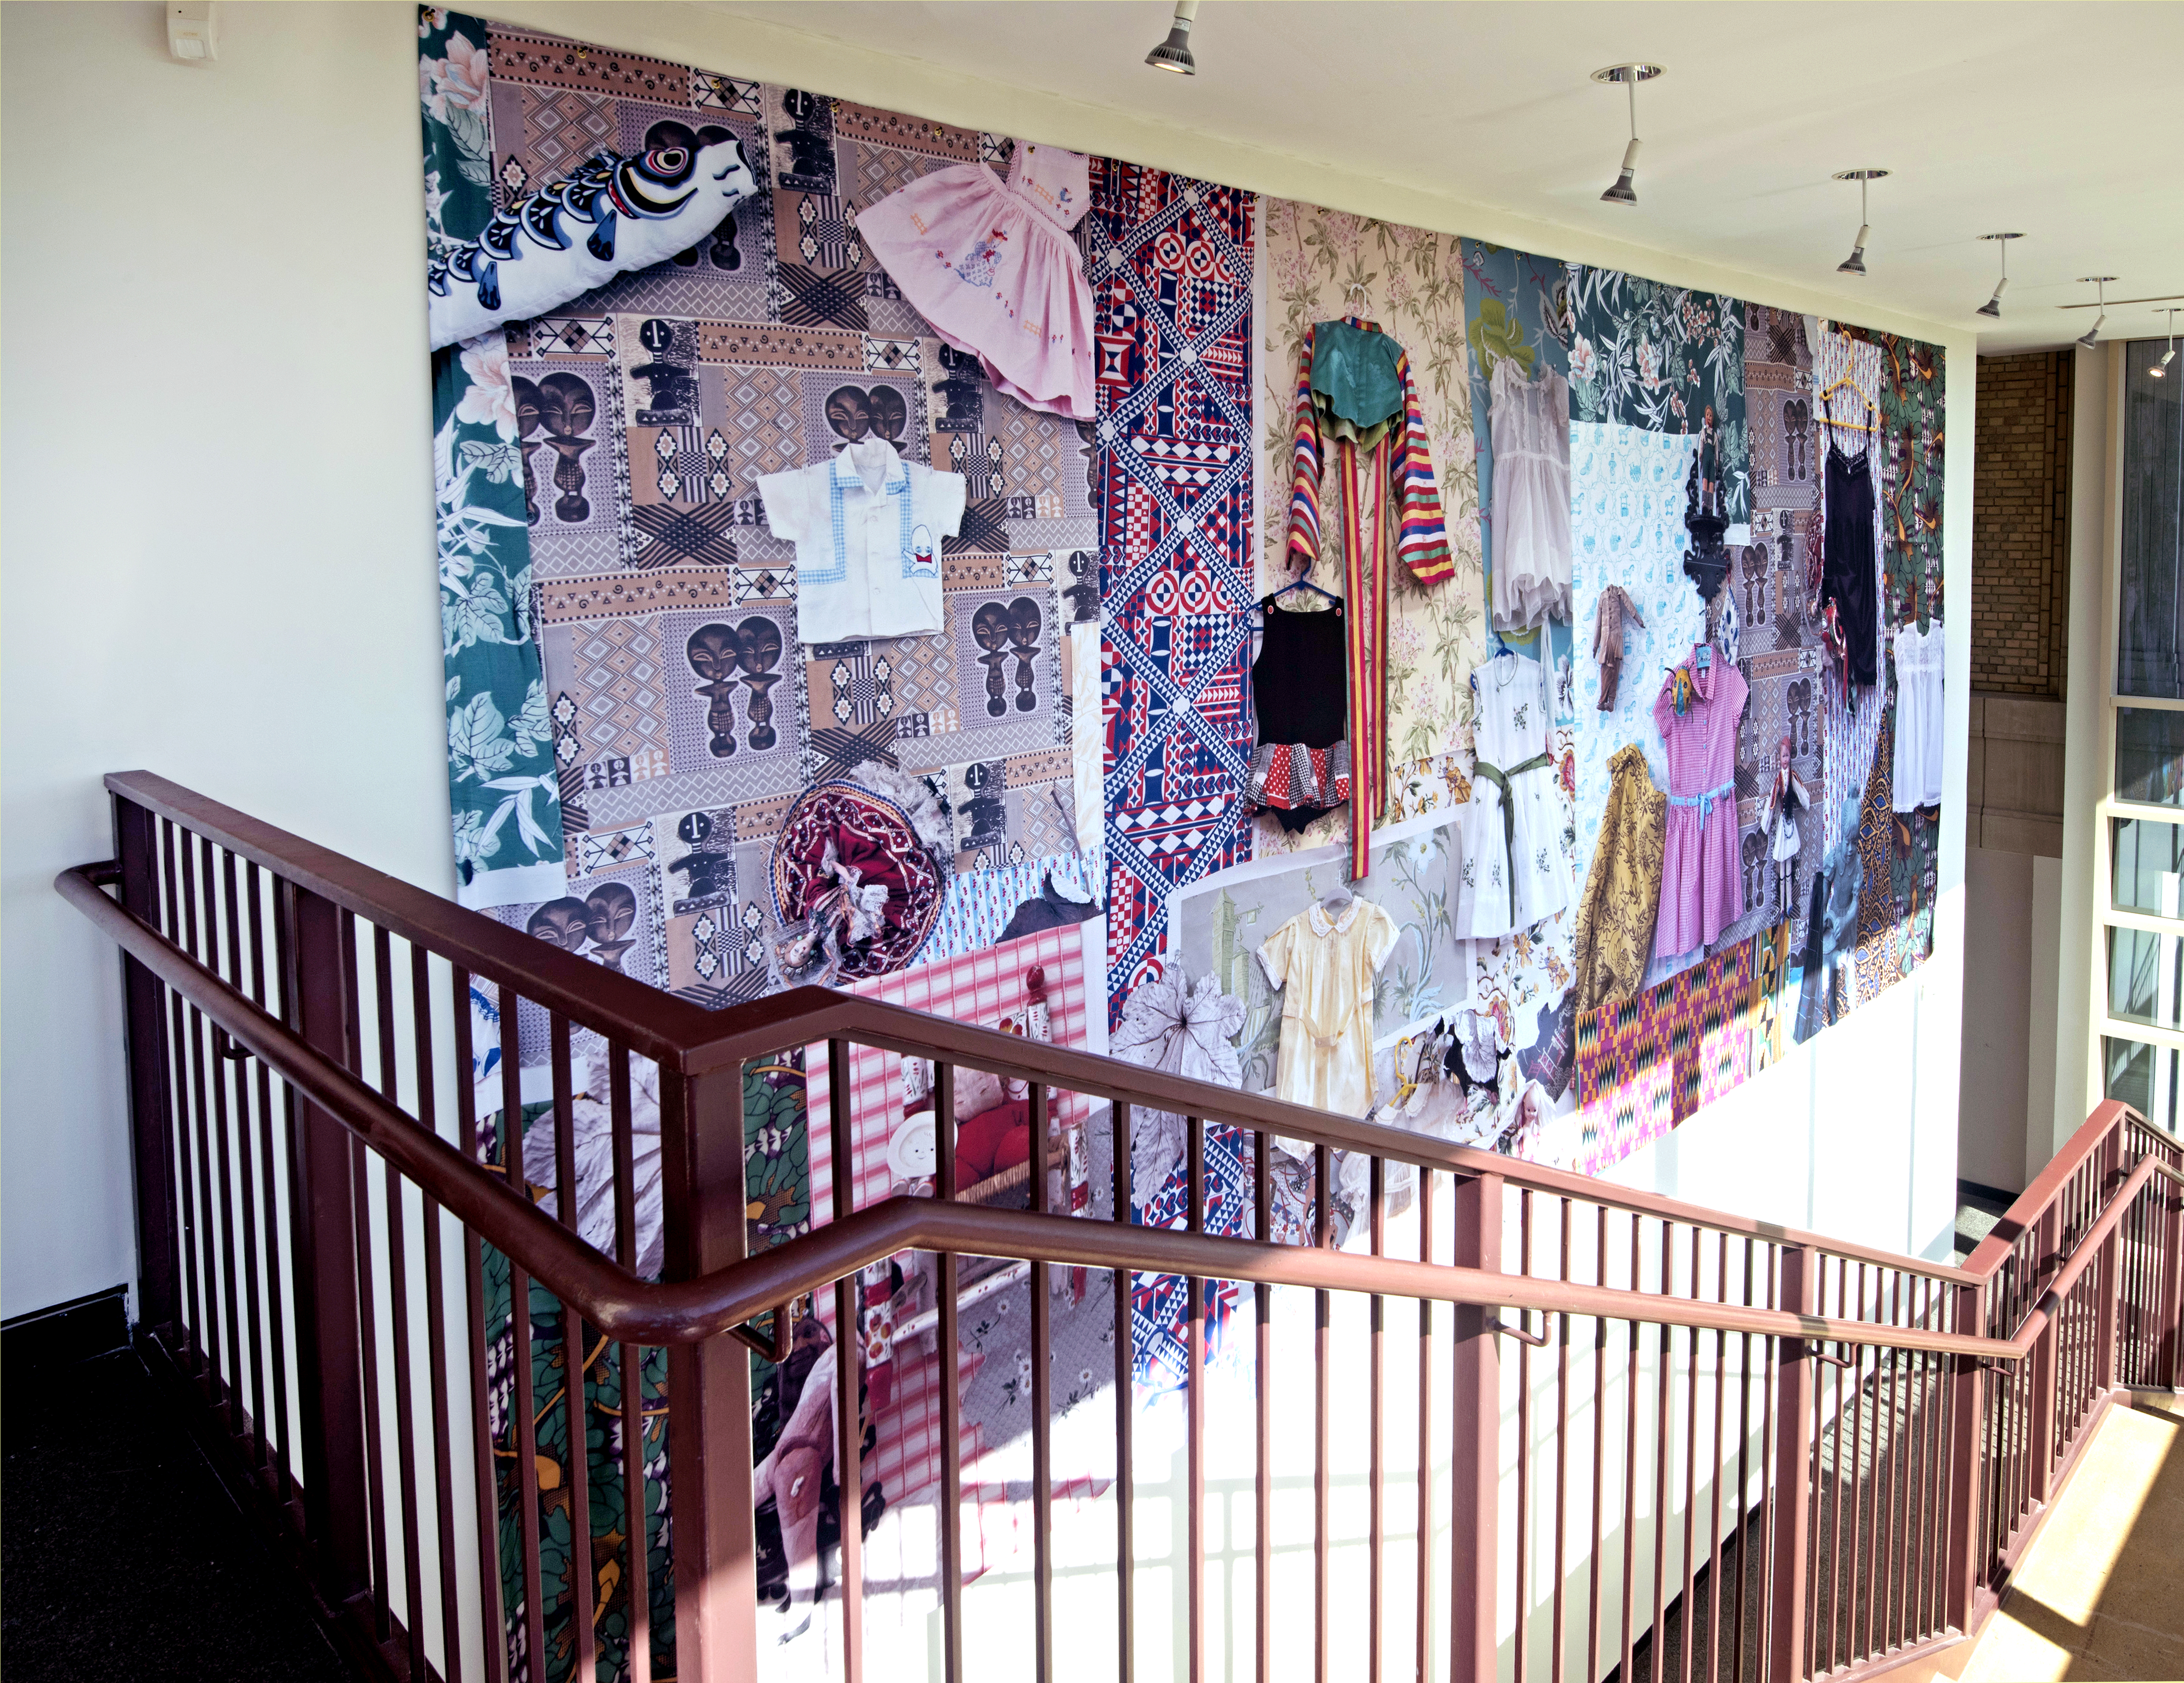 A view from the printed mural in the Laurie Art Stairwell.